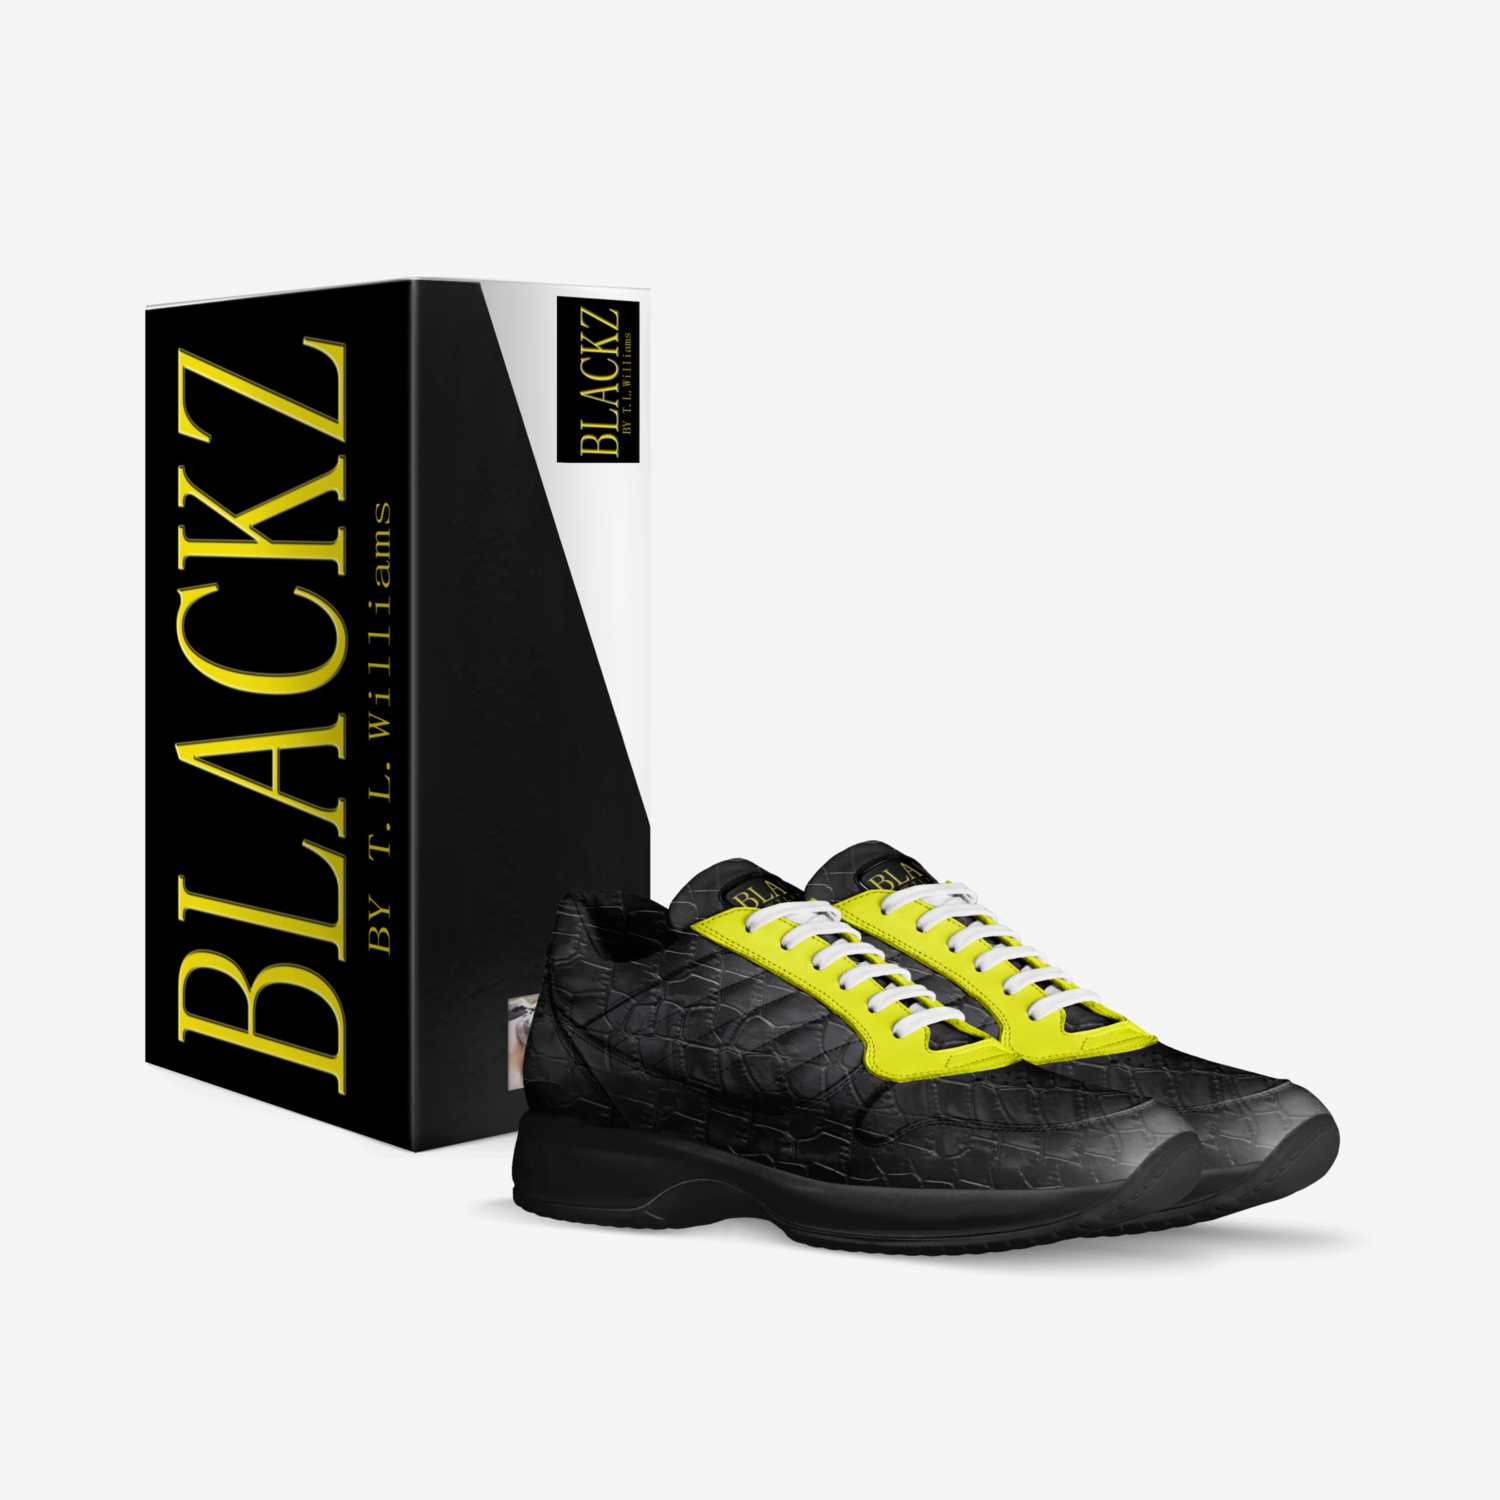 BLACKZ custom made in Italy shoes by Terance Williams | Box view